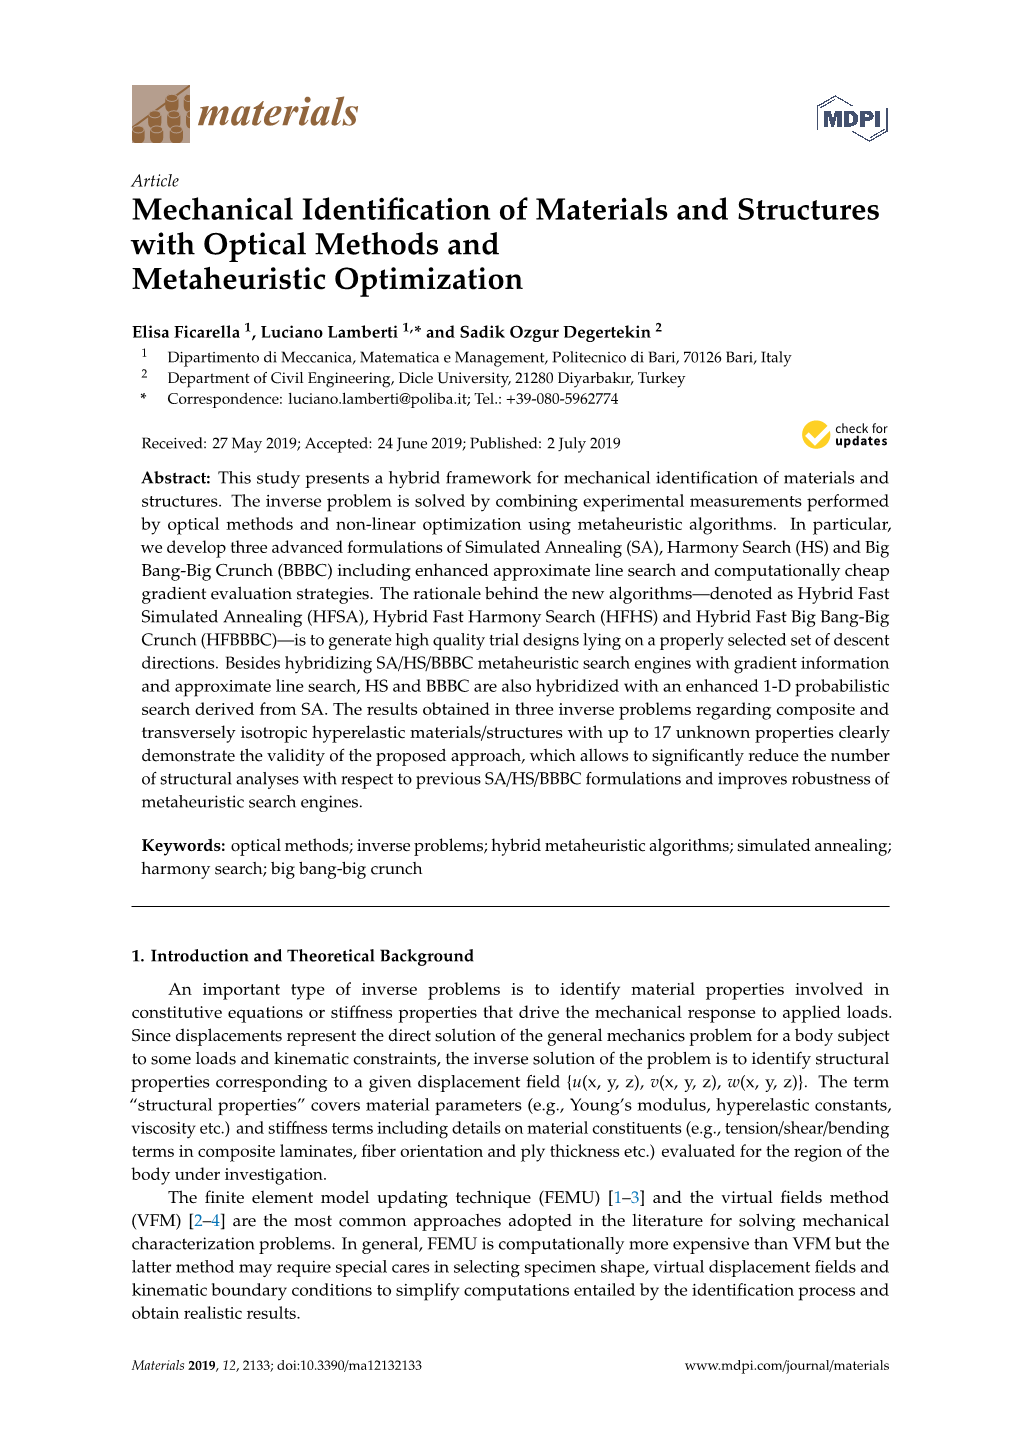 Mechanical Identification of Materials and Structures with Optical Methods